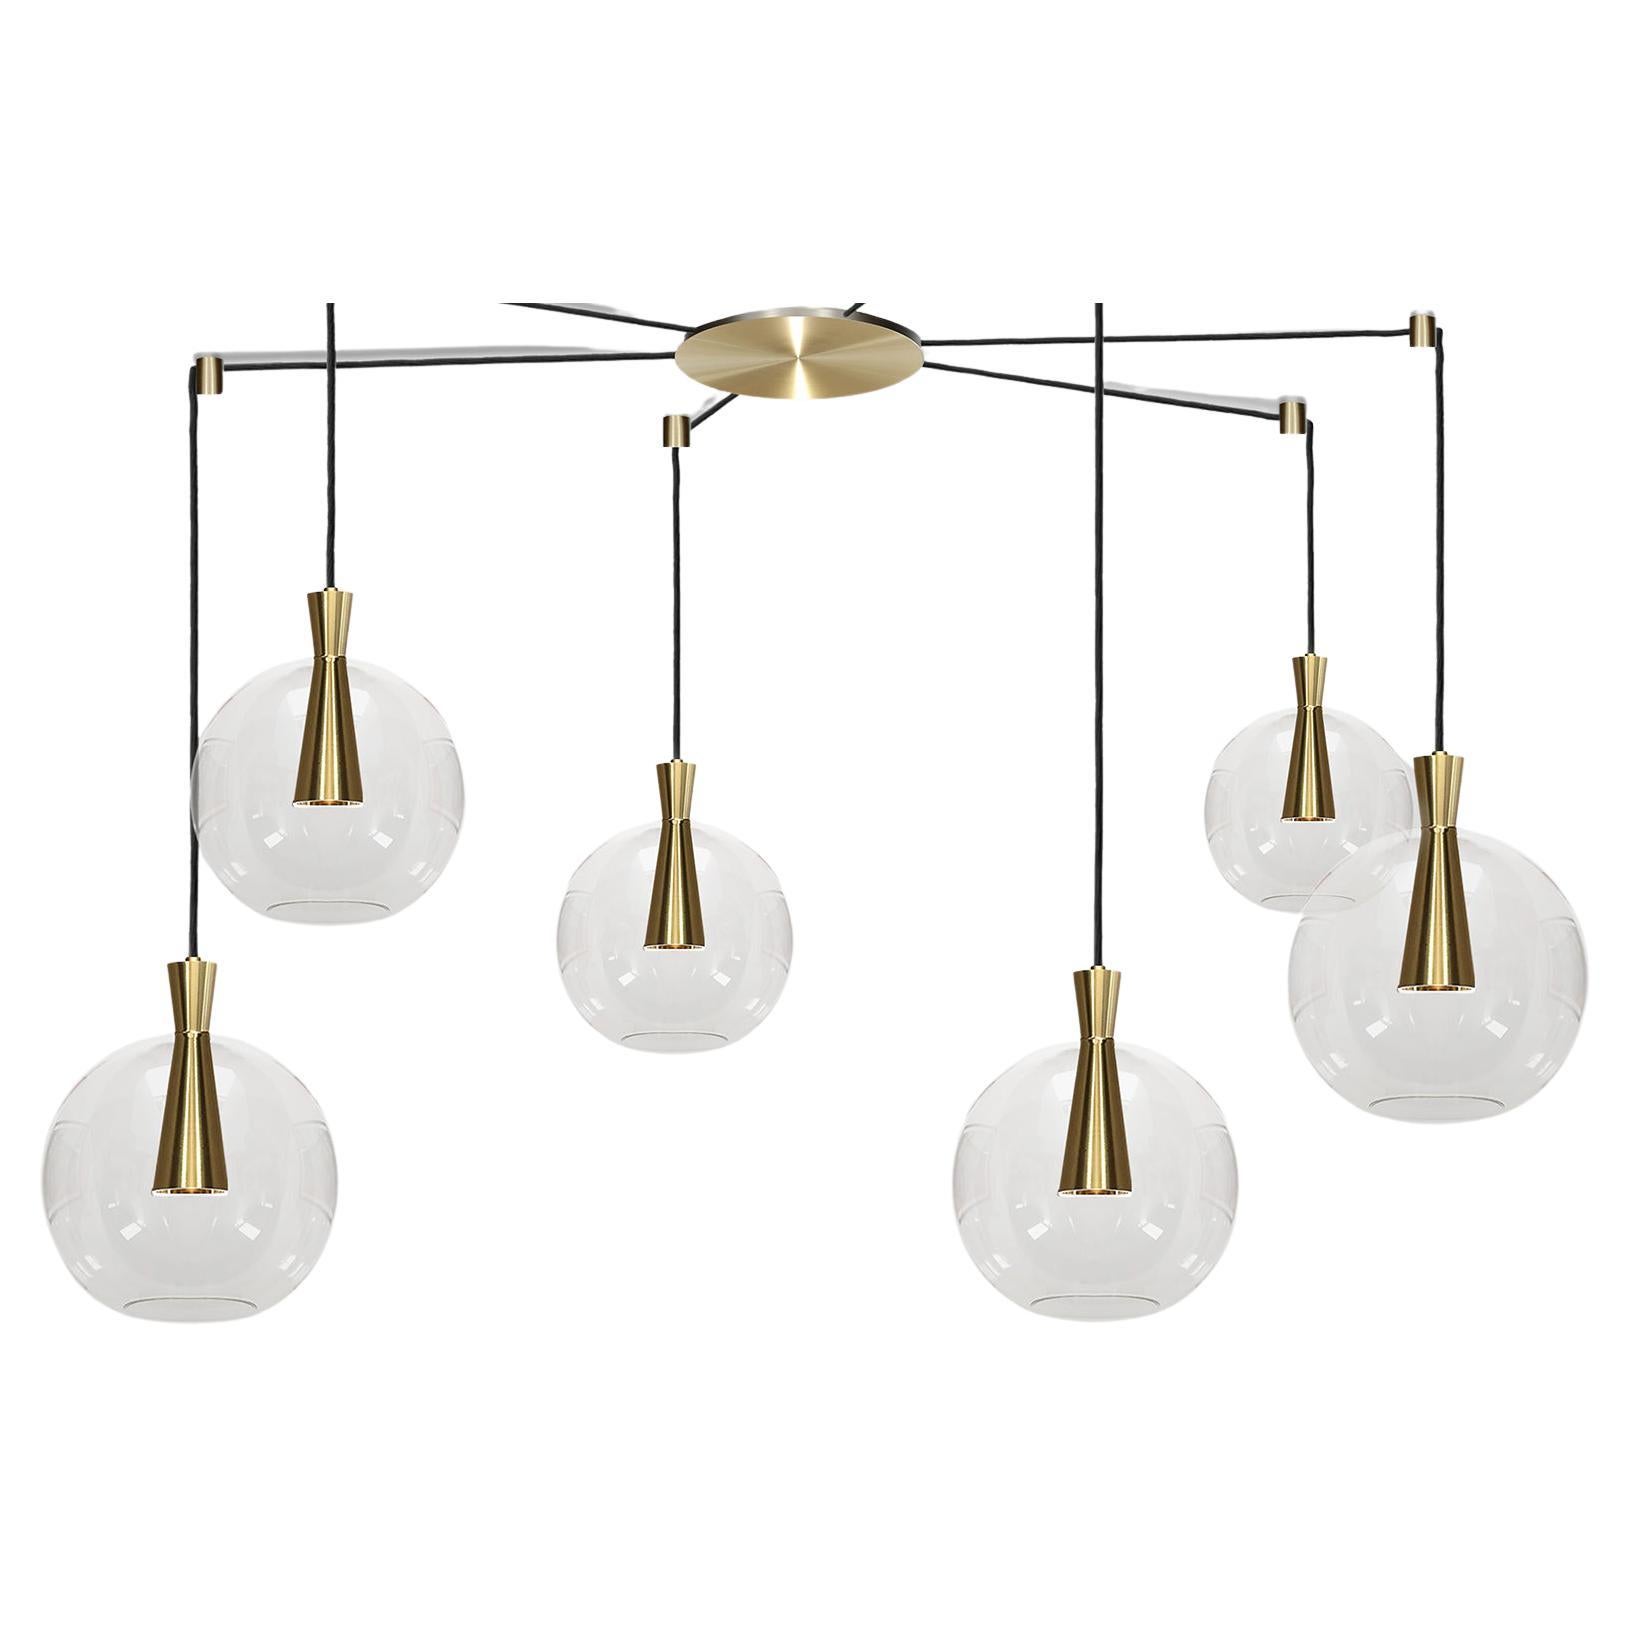 Cone Lamp and Shade, Wide 6-Piece by Marc Wood, Brass & Glass Handmade Lamps For Sale